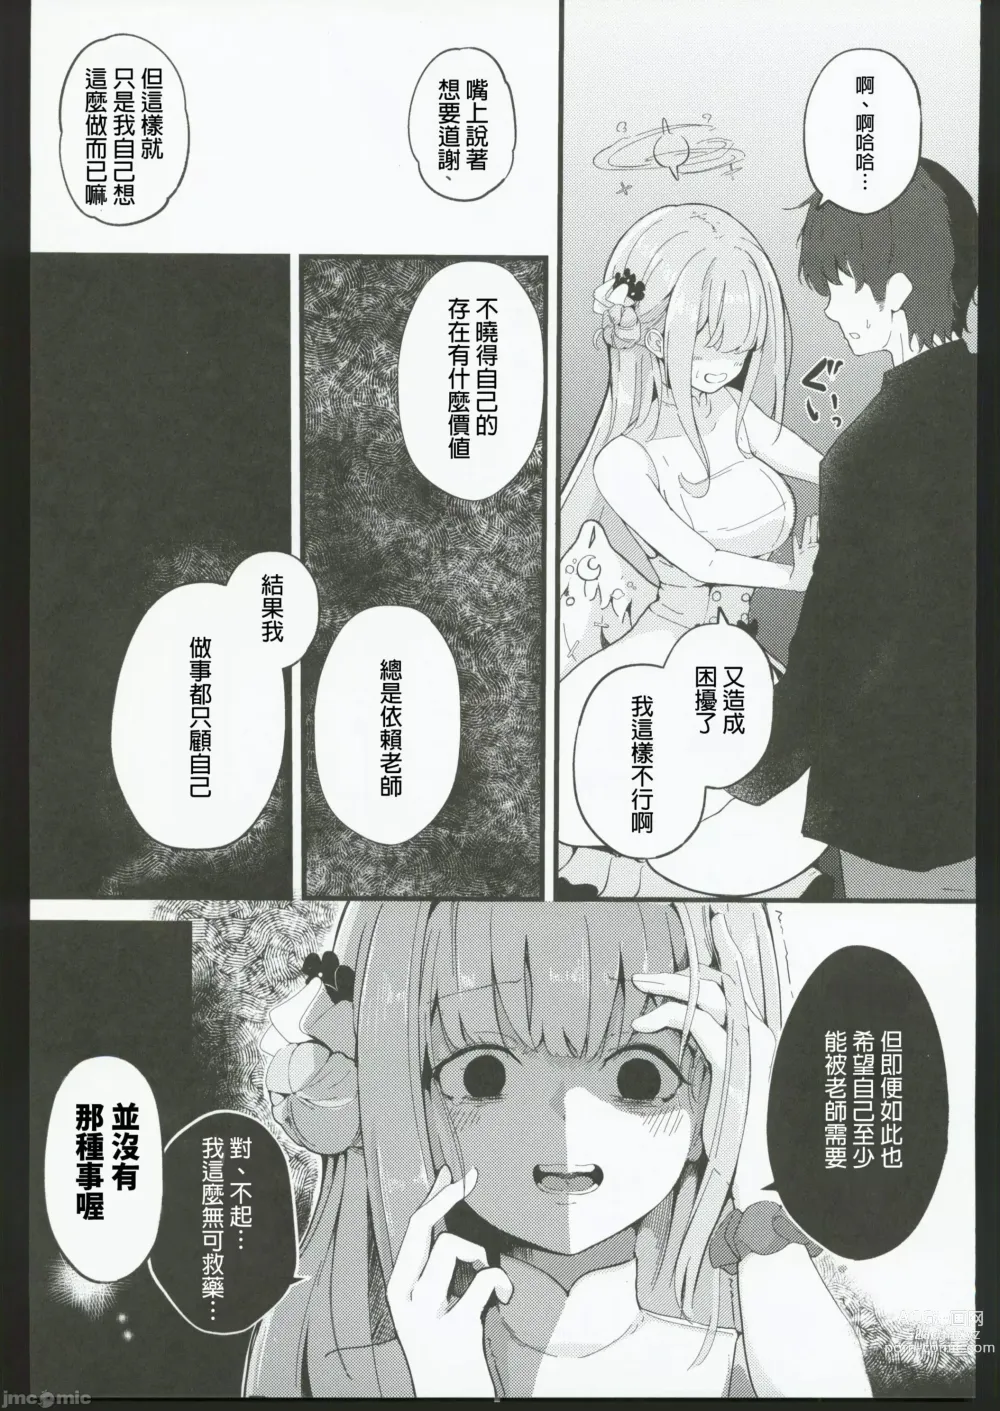 Page 10 of doujinshi Blanc Aile to Otogibanashi - The treaty lost, but hope remains.